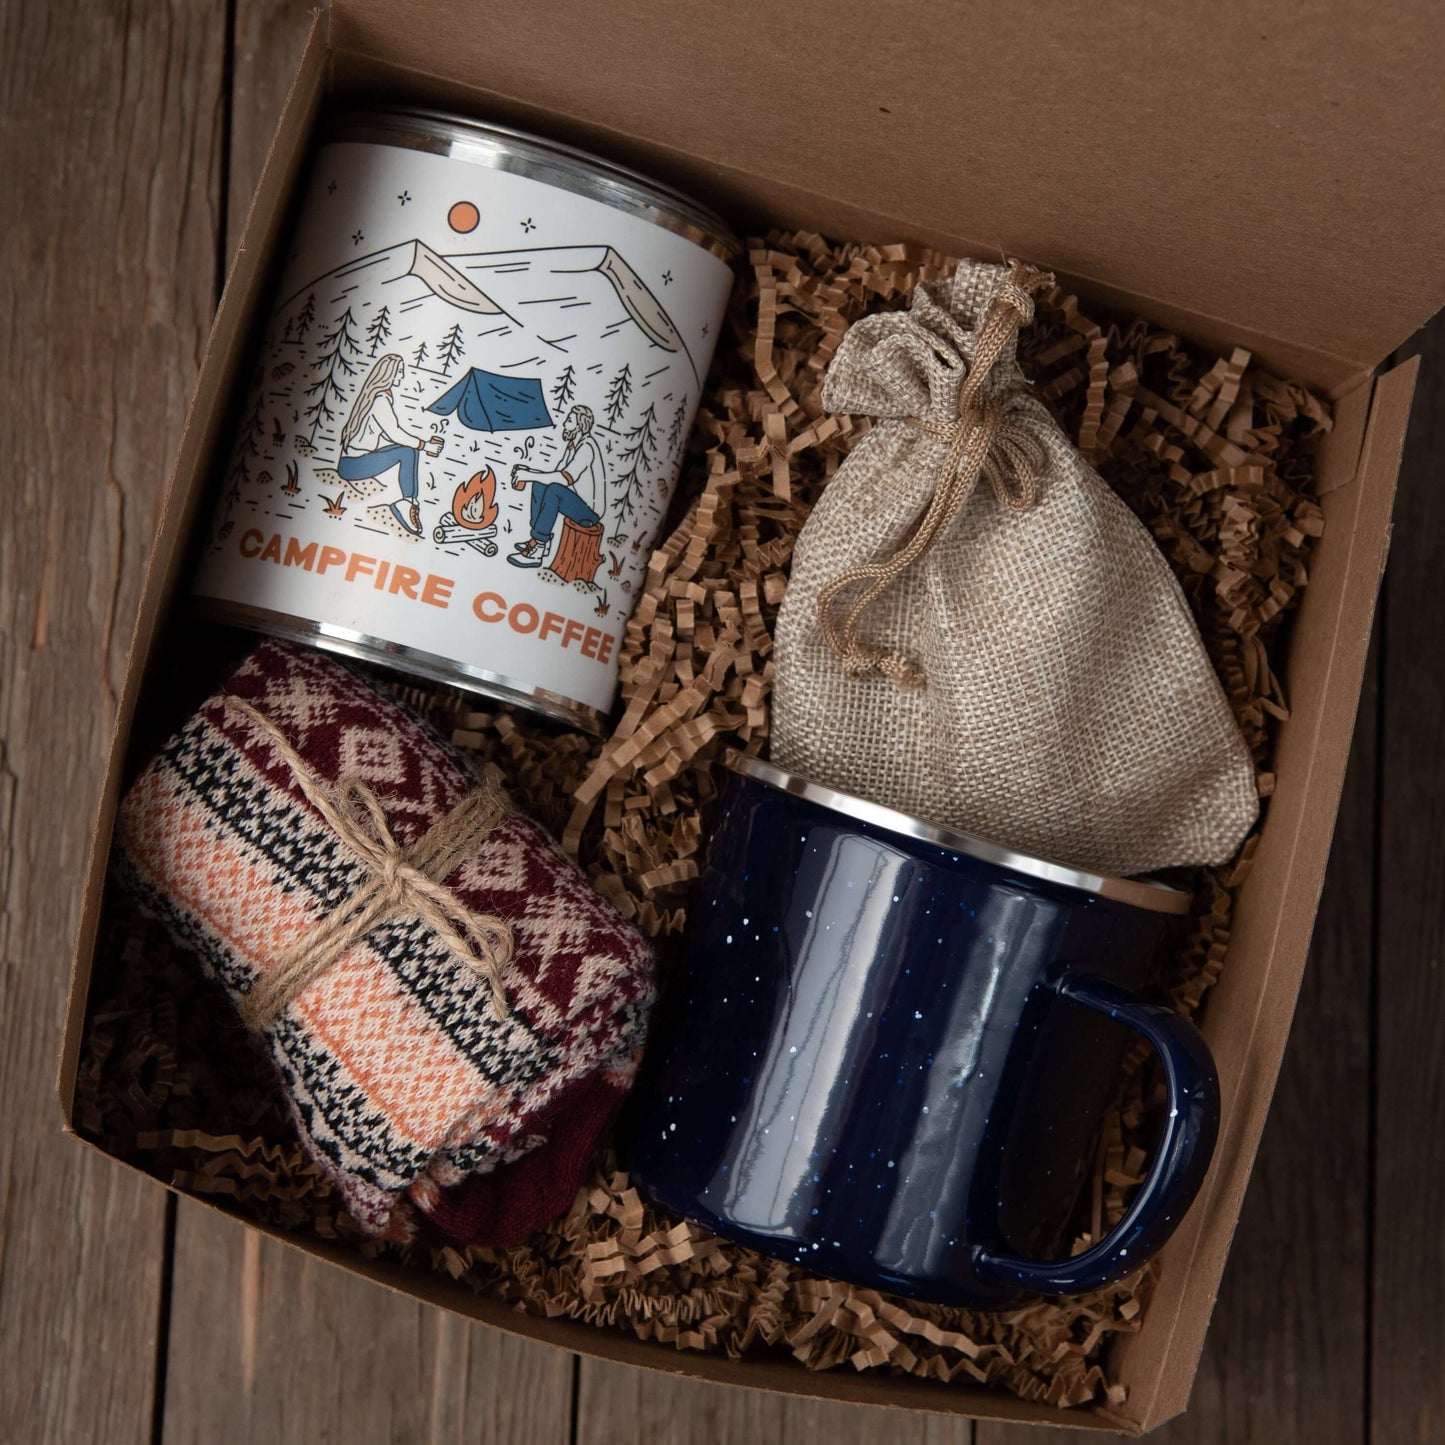 Coffee Gift Box, Coffee Gifts, Coffee Lover Gift, Box for Women, Gift for  Her Friend, Hygge Gift, Best Holiday Gifts for Her, Friendship Box 